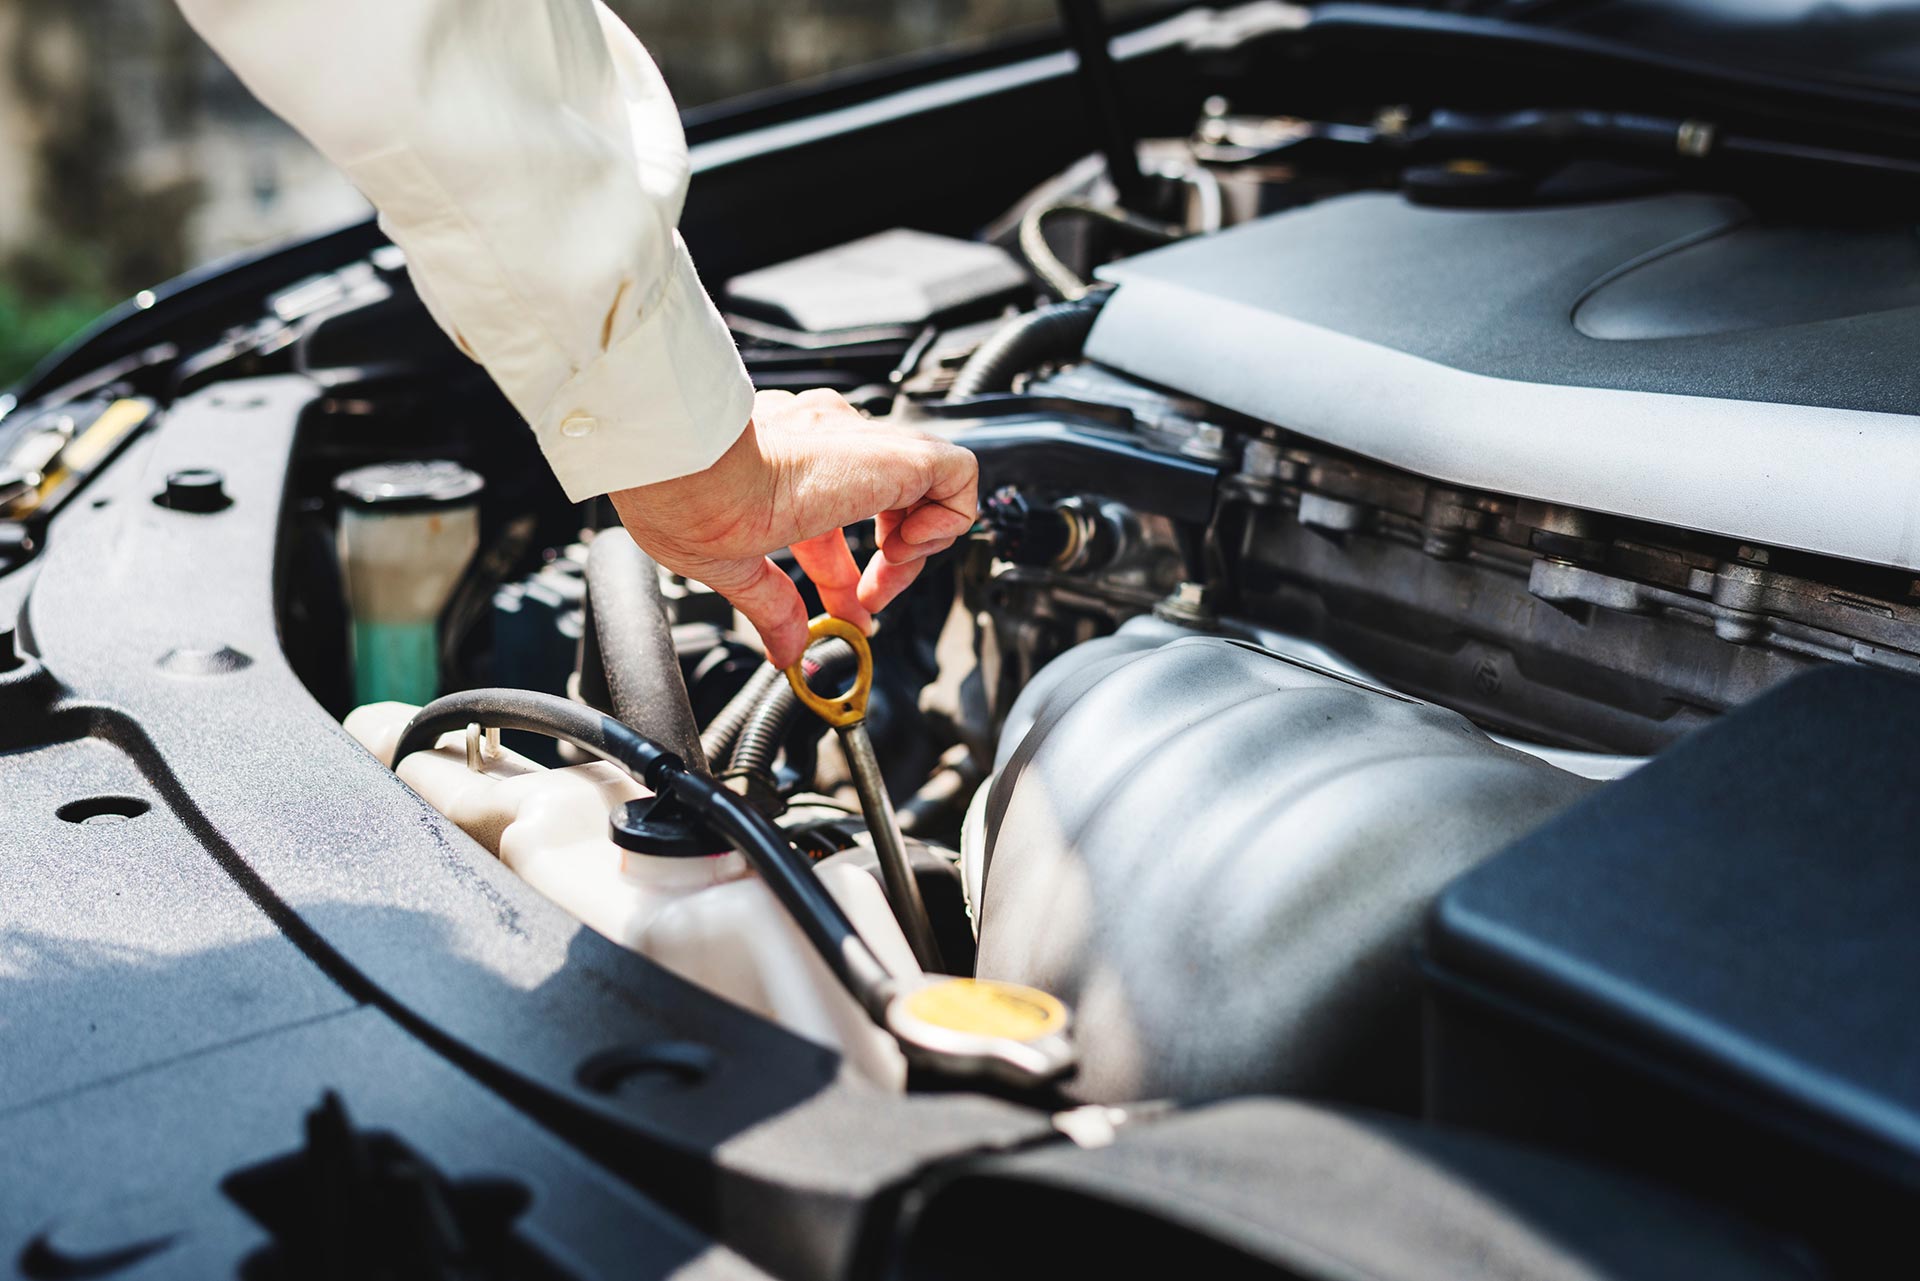 How To Tell If Your Vehicle Needs an Oil Change